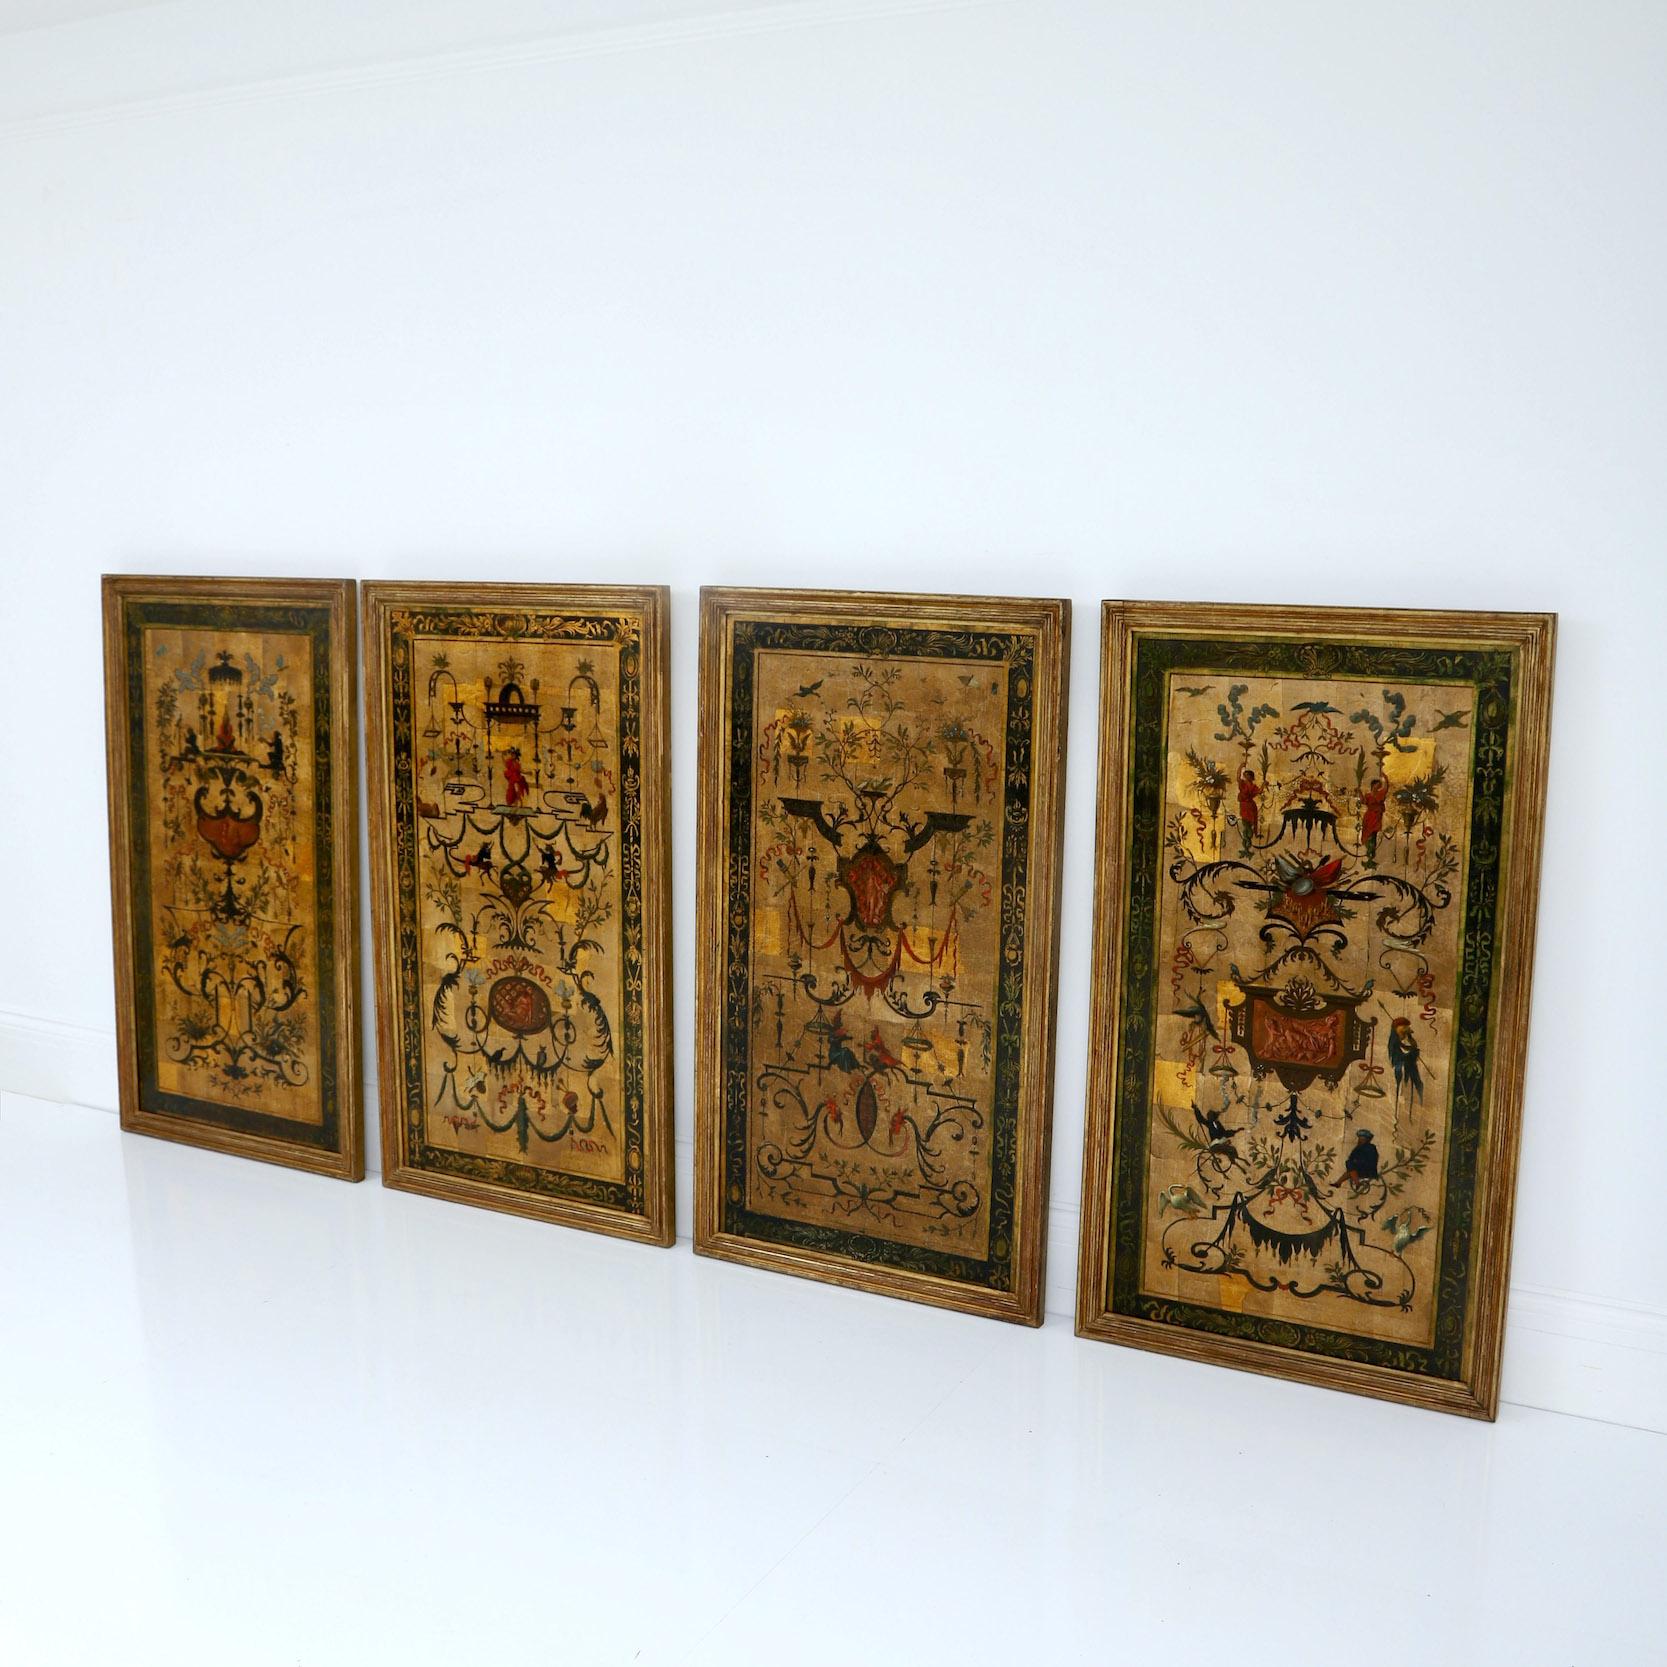 We presents a set of four 19th century paintings on canvas.

France, Circa 1840

” A stunning set of 4 oil on canvas paintings with chinoiserie decoration in the manner of Jean Bérain the Elder (1640-1711) presented in their original moulded